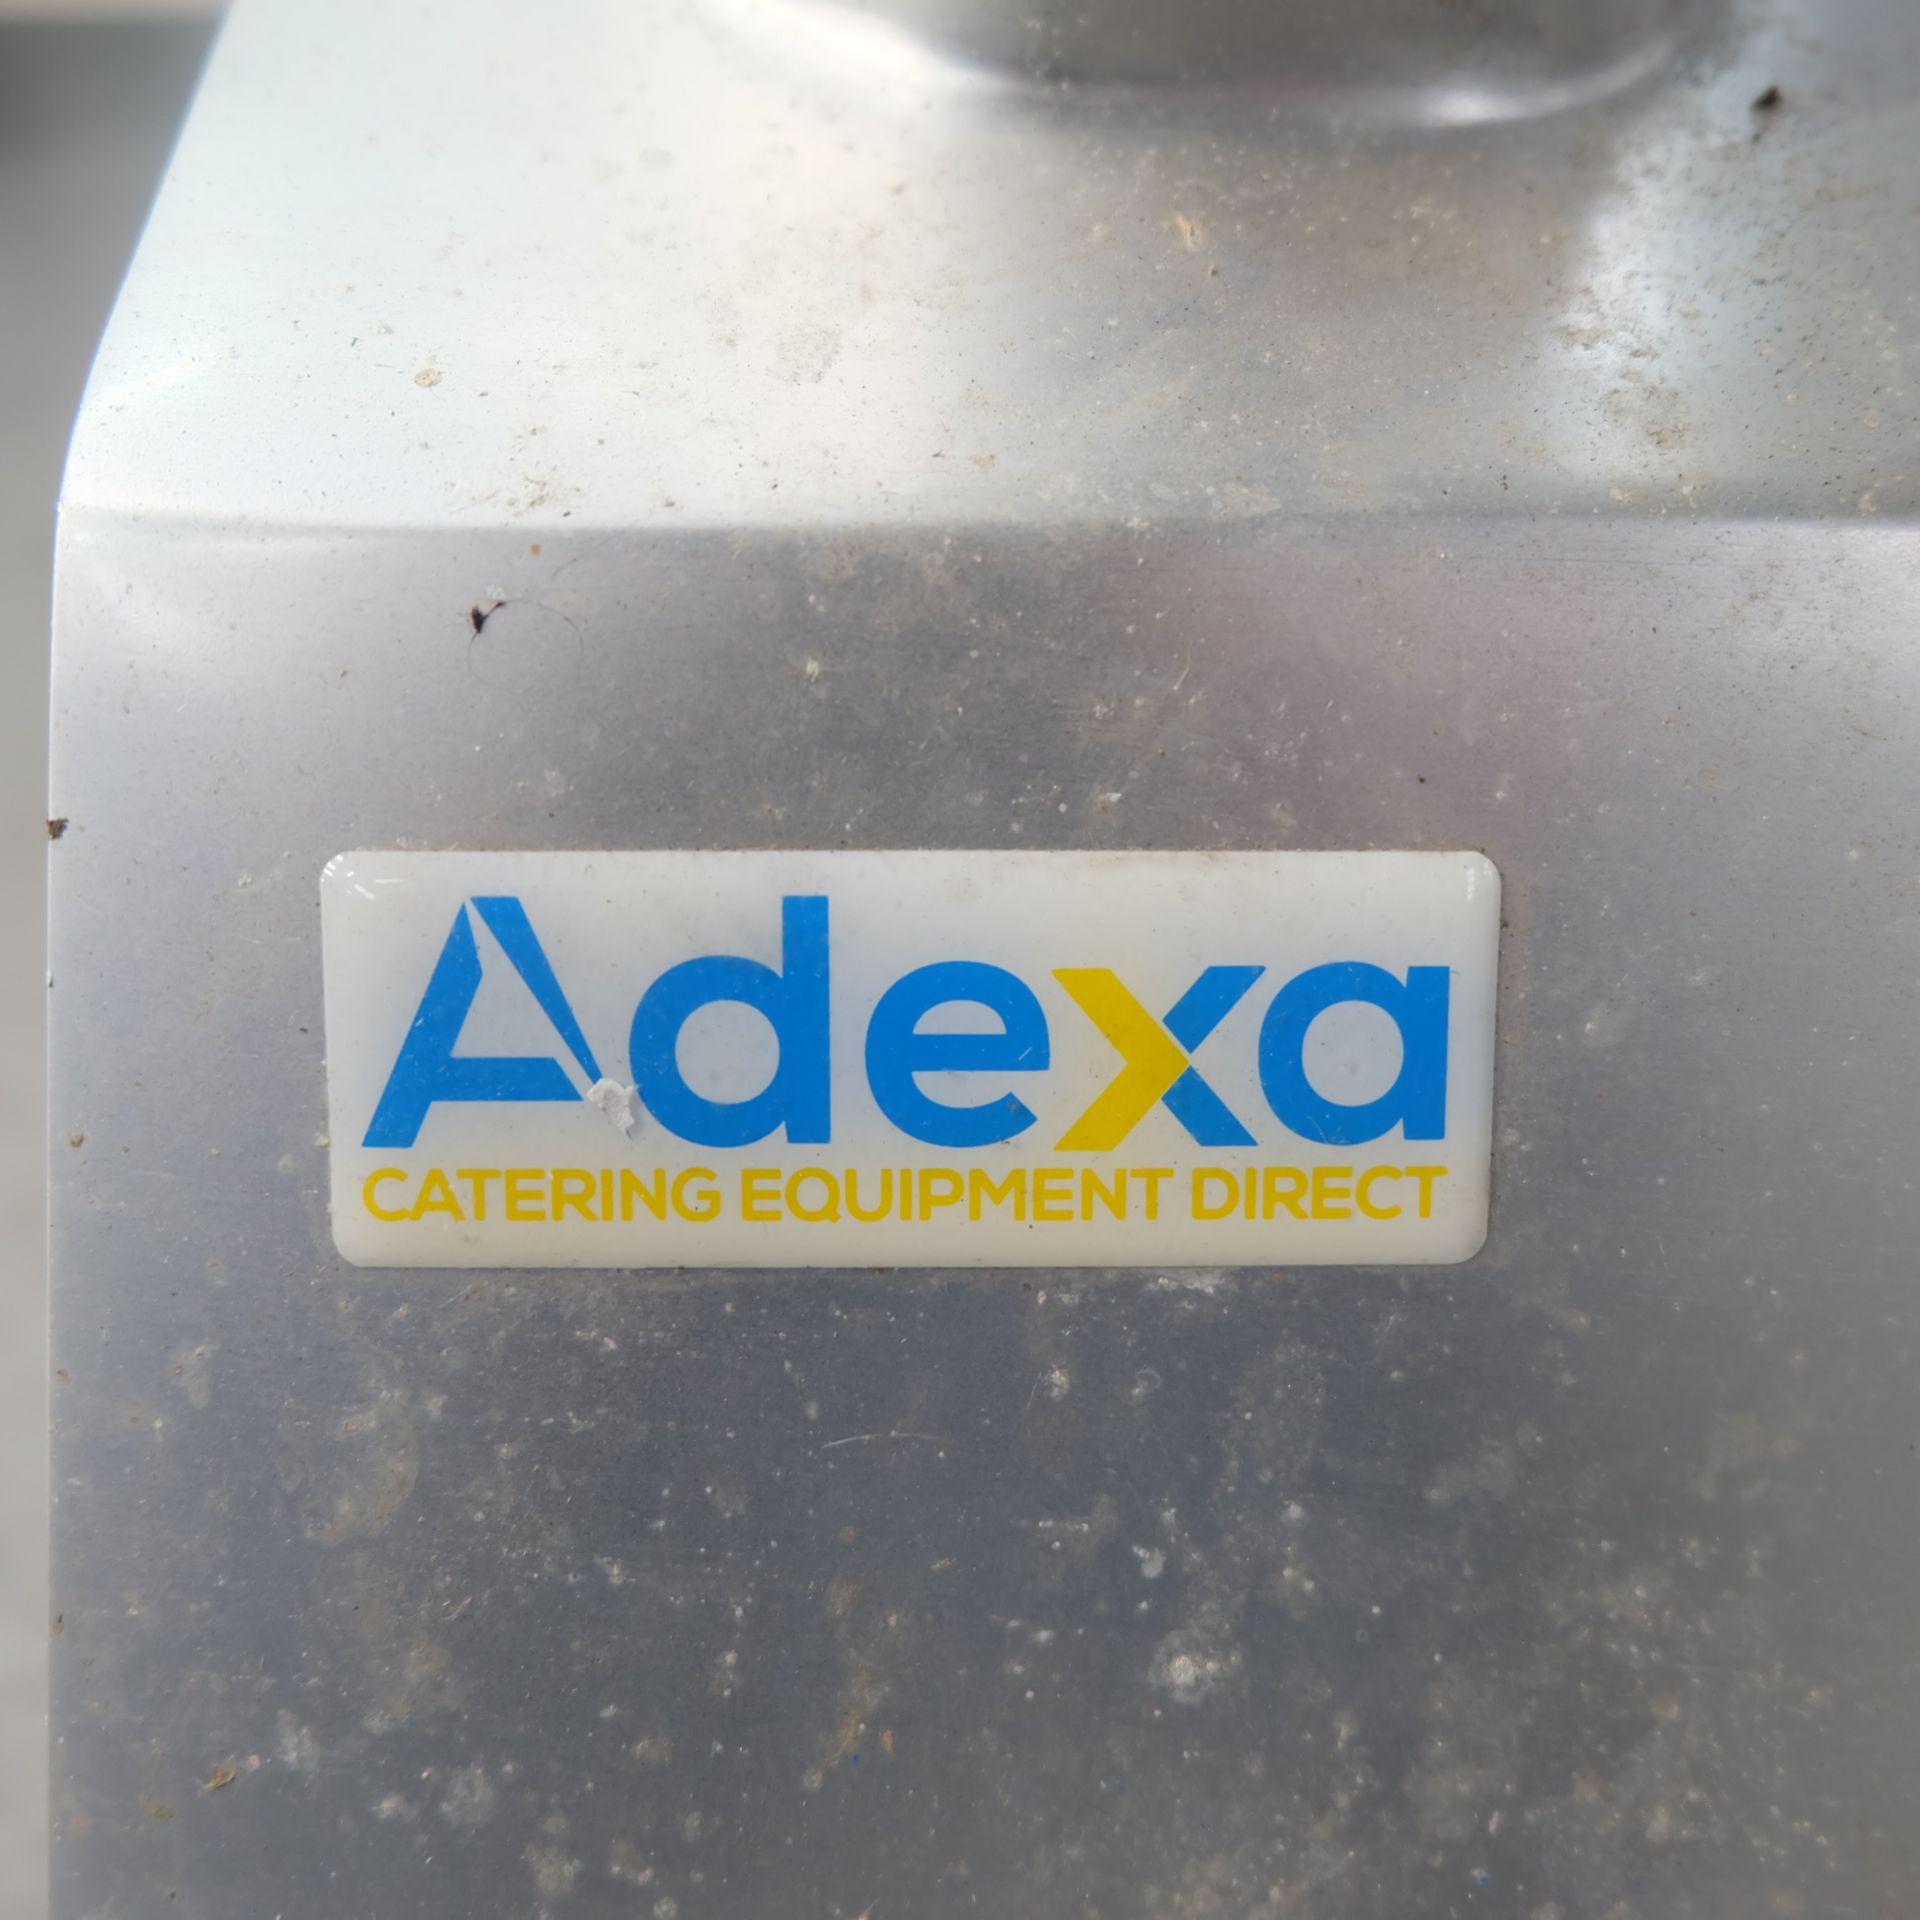 Adexa Table Top Commercial Vegetable Preparation Machine. Production Capacity 300kg/hour. - Image 5 of 9